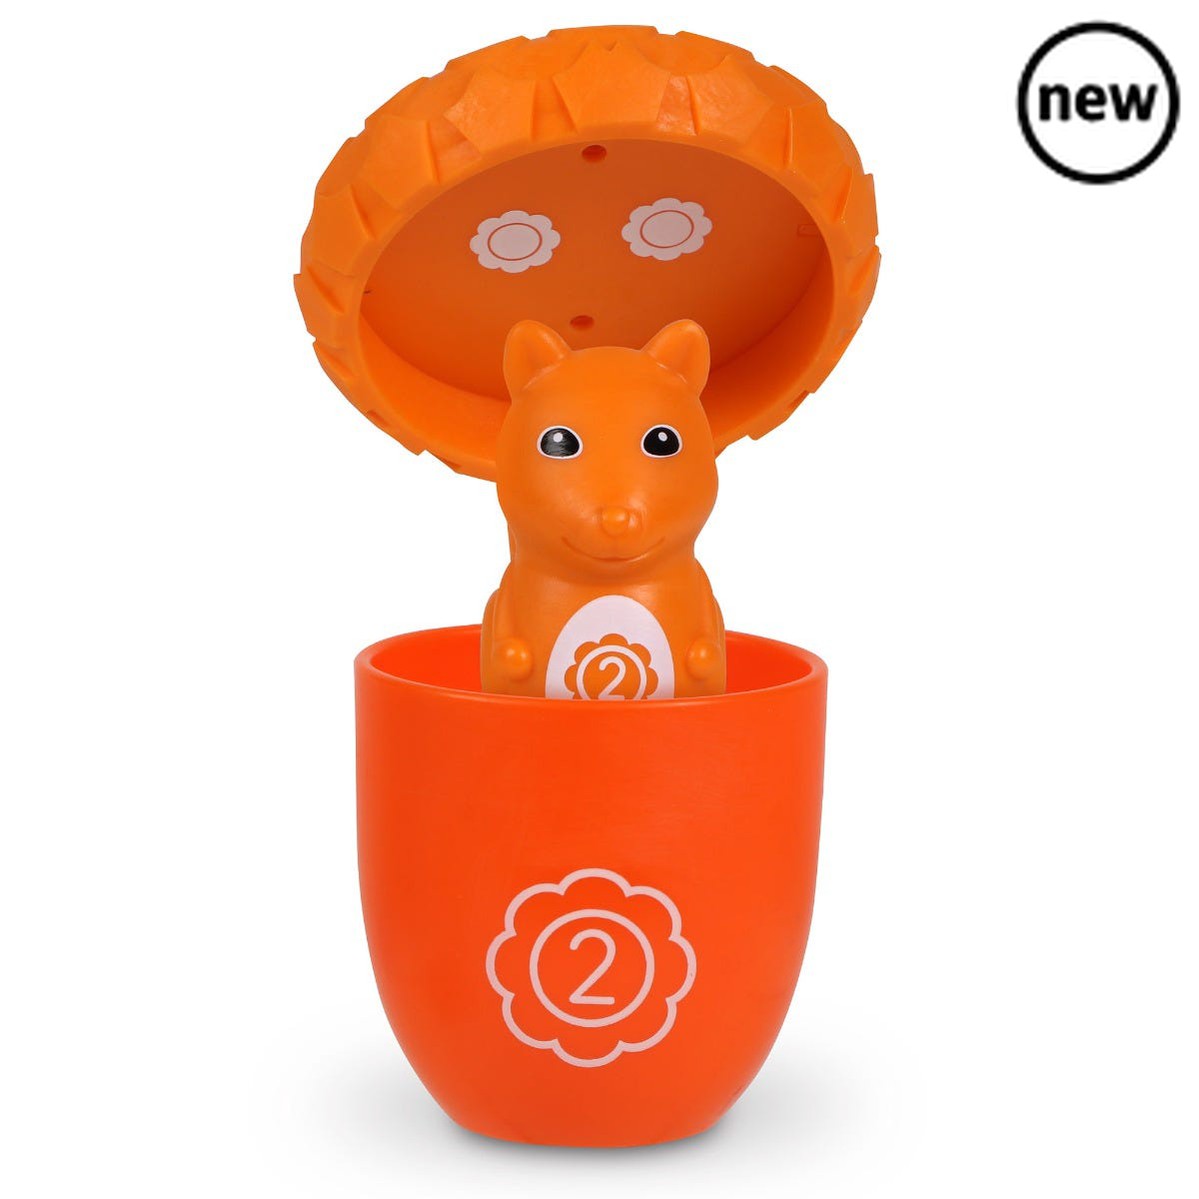 Snap-n-Learn Surprise Squirrels, What’s inside this colourful acorn toy? Could it be a friendly squirrel ready for preschool learning fun? As children pop the textured lids off the 5 colourful acorns to find the adorable squirrel hiding inside each one, they build essential early years skills through peek-a-boo play. There are 5 numbered acorns in this Snap-n-Learn Surprise Squirrels set – 1 each in blue, orange, green, purple, and yellow – with 5 matching squirrel toys to match. After play, pieces store in